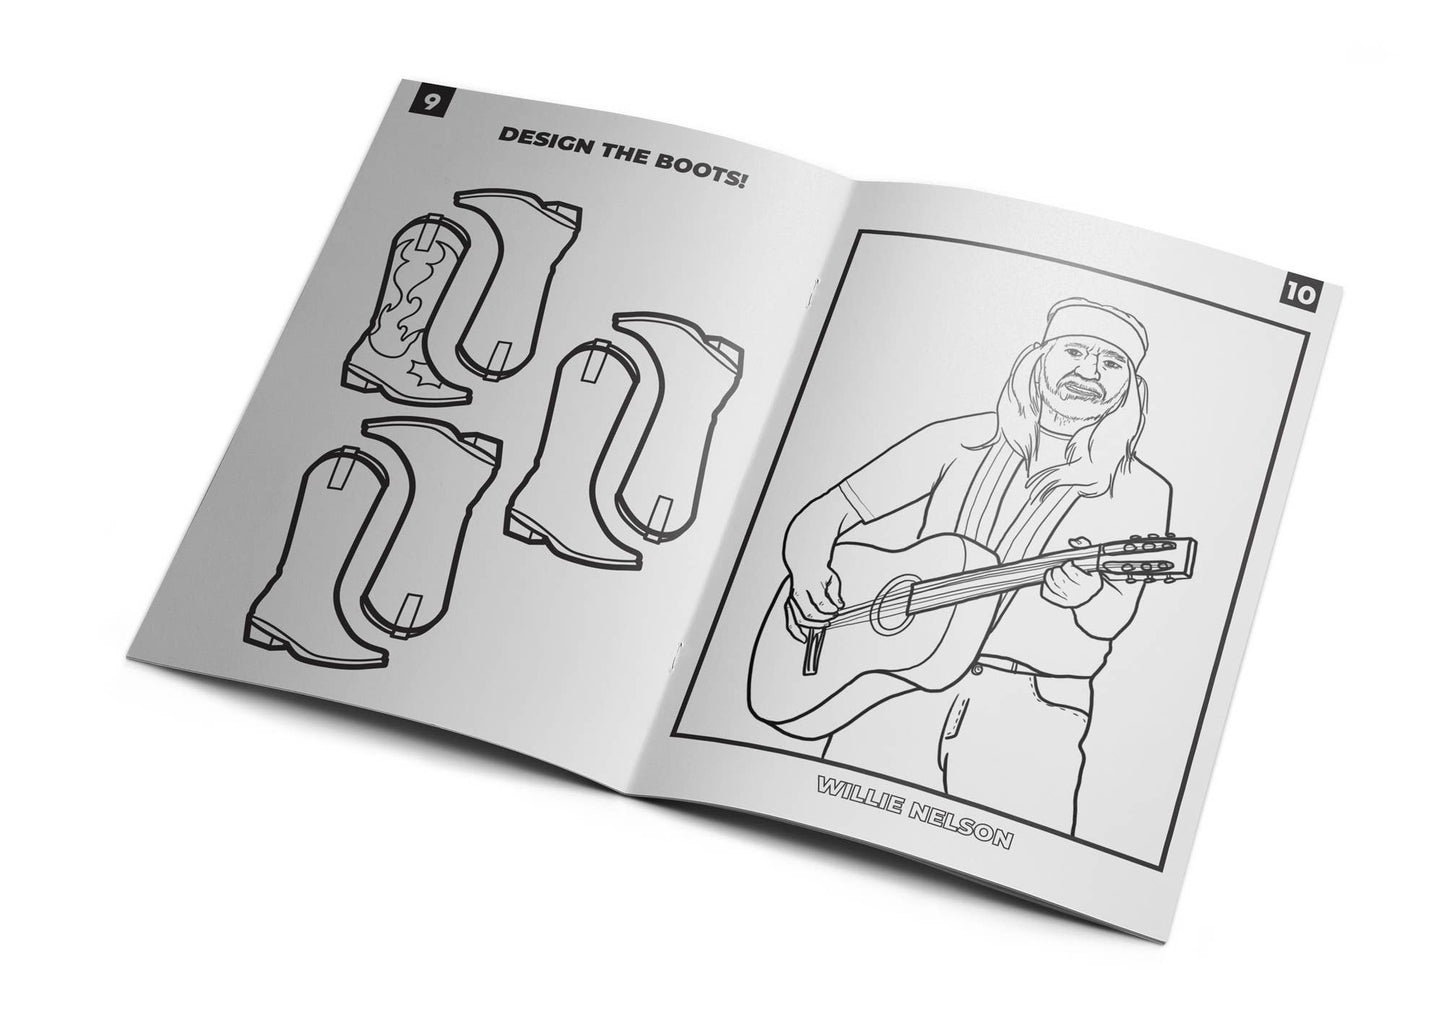 Country Singers Activity Coloring Book